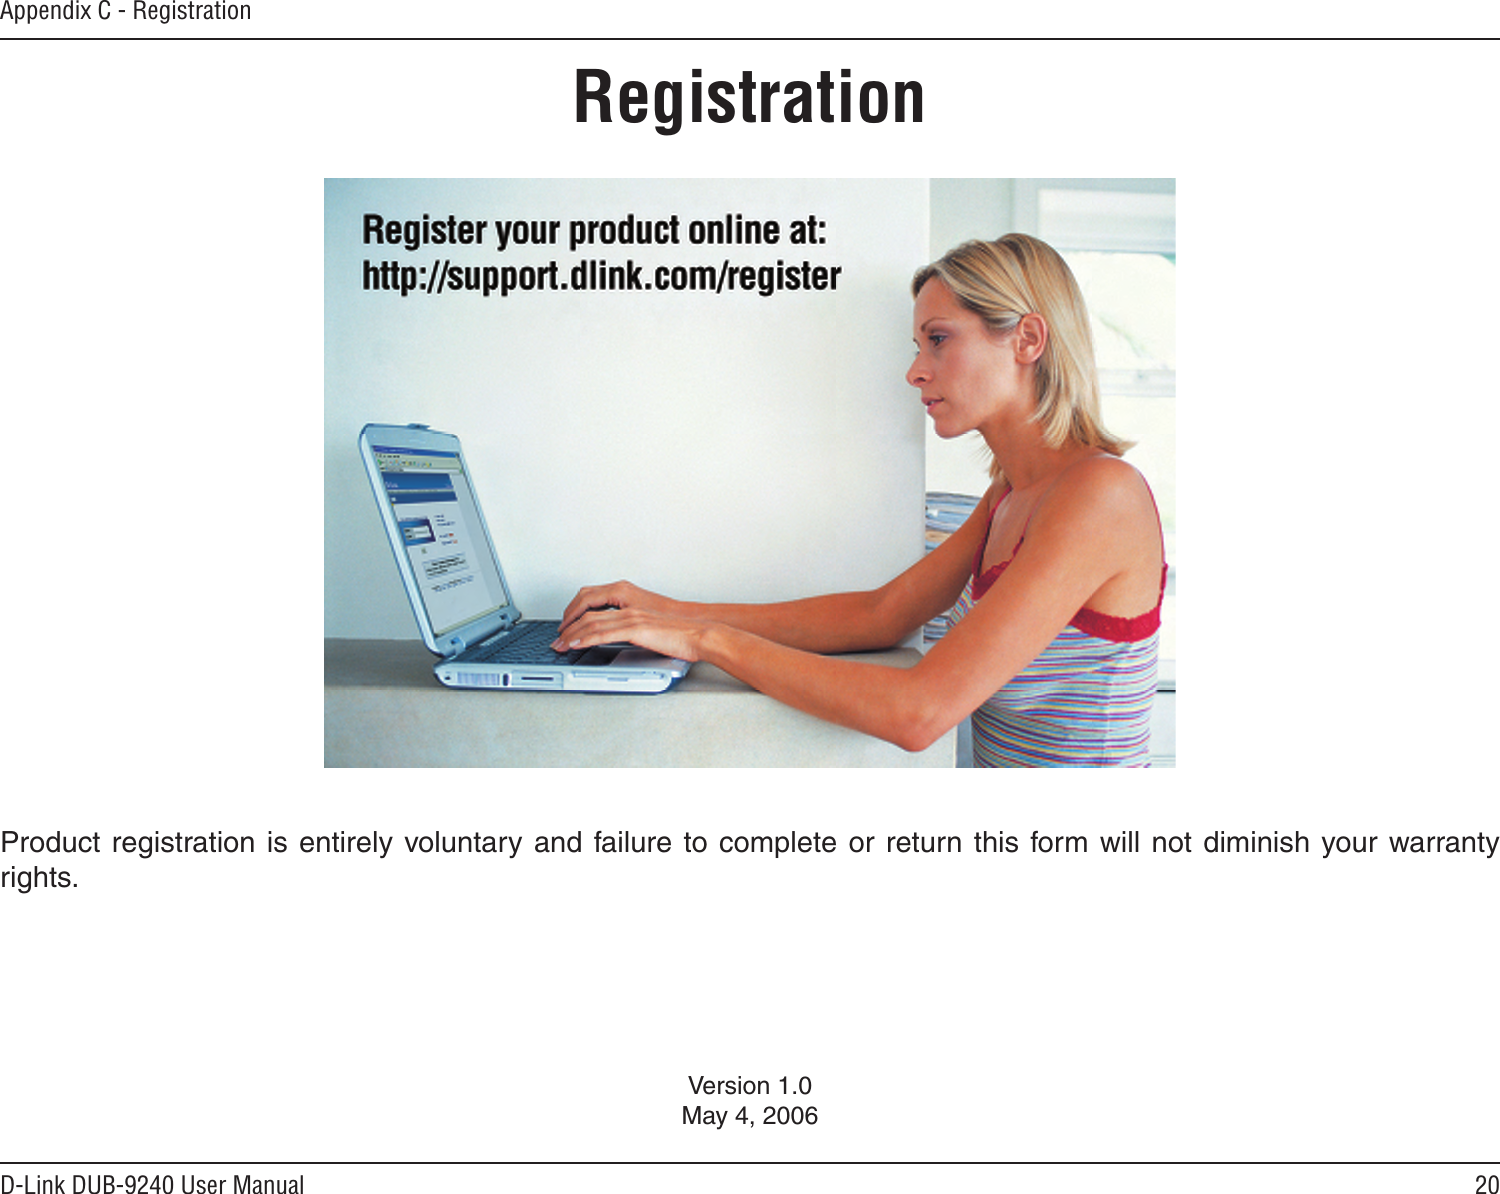 20D-Link DUB-9240 User ManualAppendix C - RegistrationVersion 1.0May 4, 2006Product registration is entirely voluntary and failure to complete or return  this form  will not diminish  your warranty rights.Registration